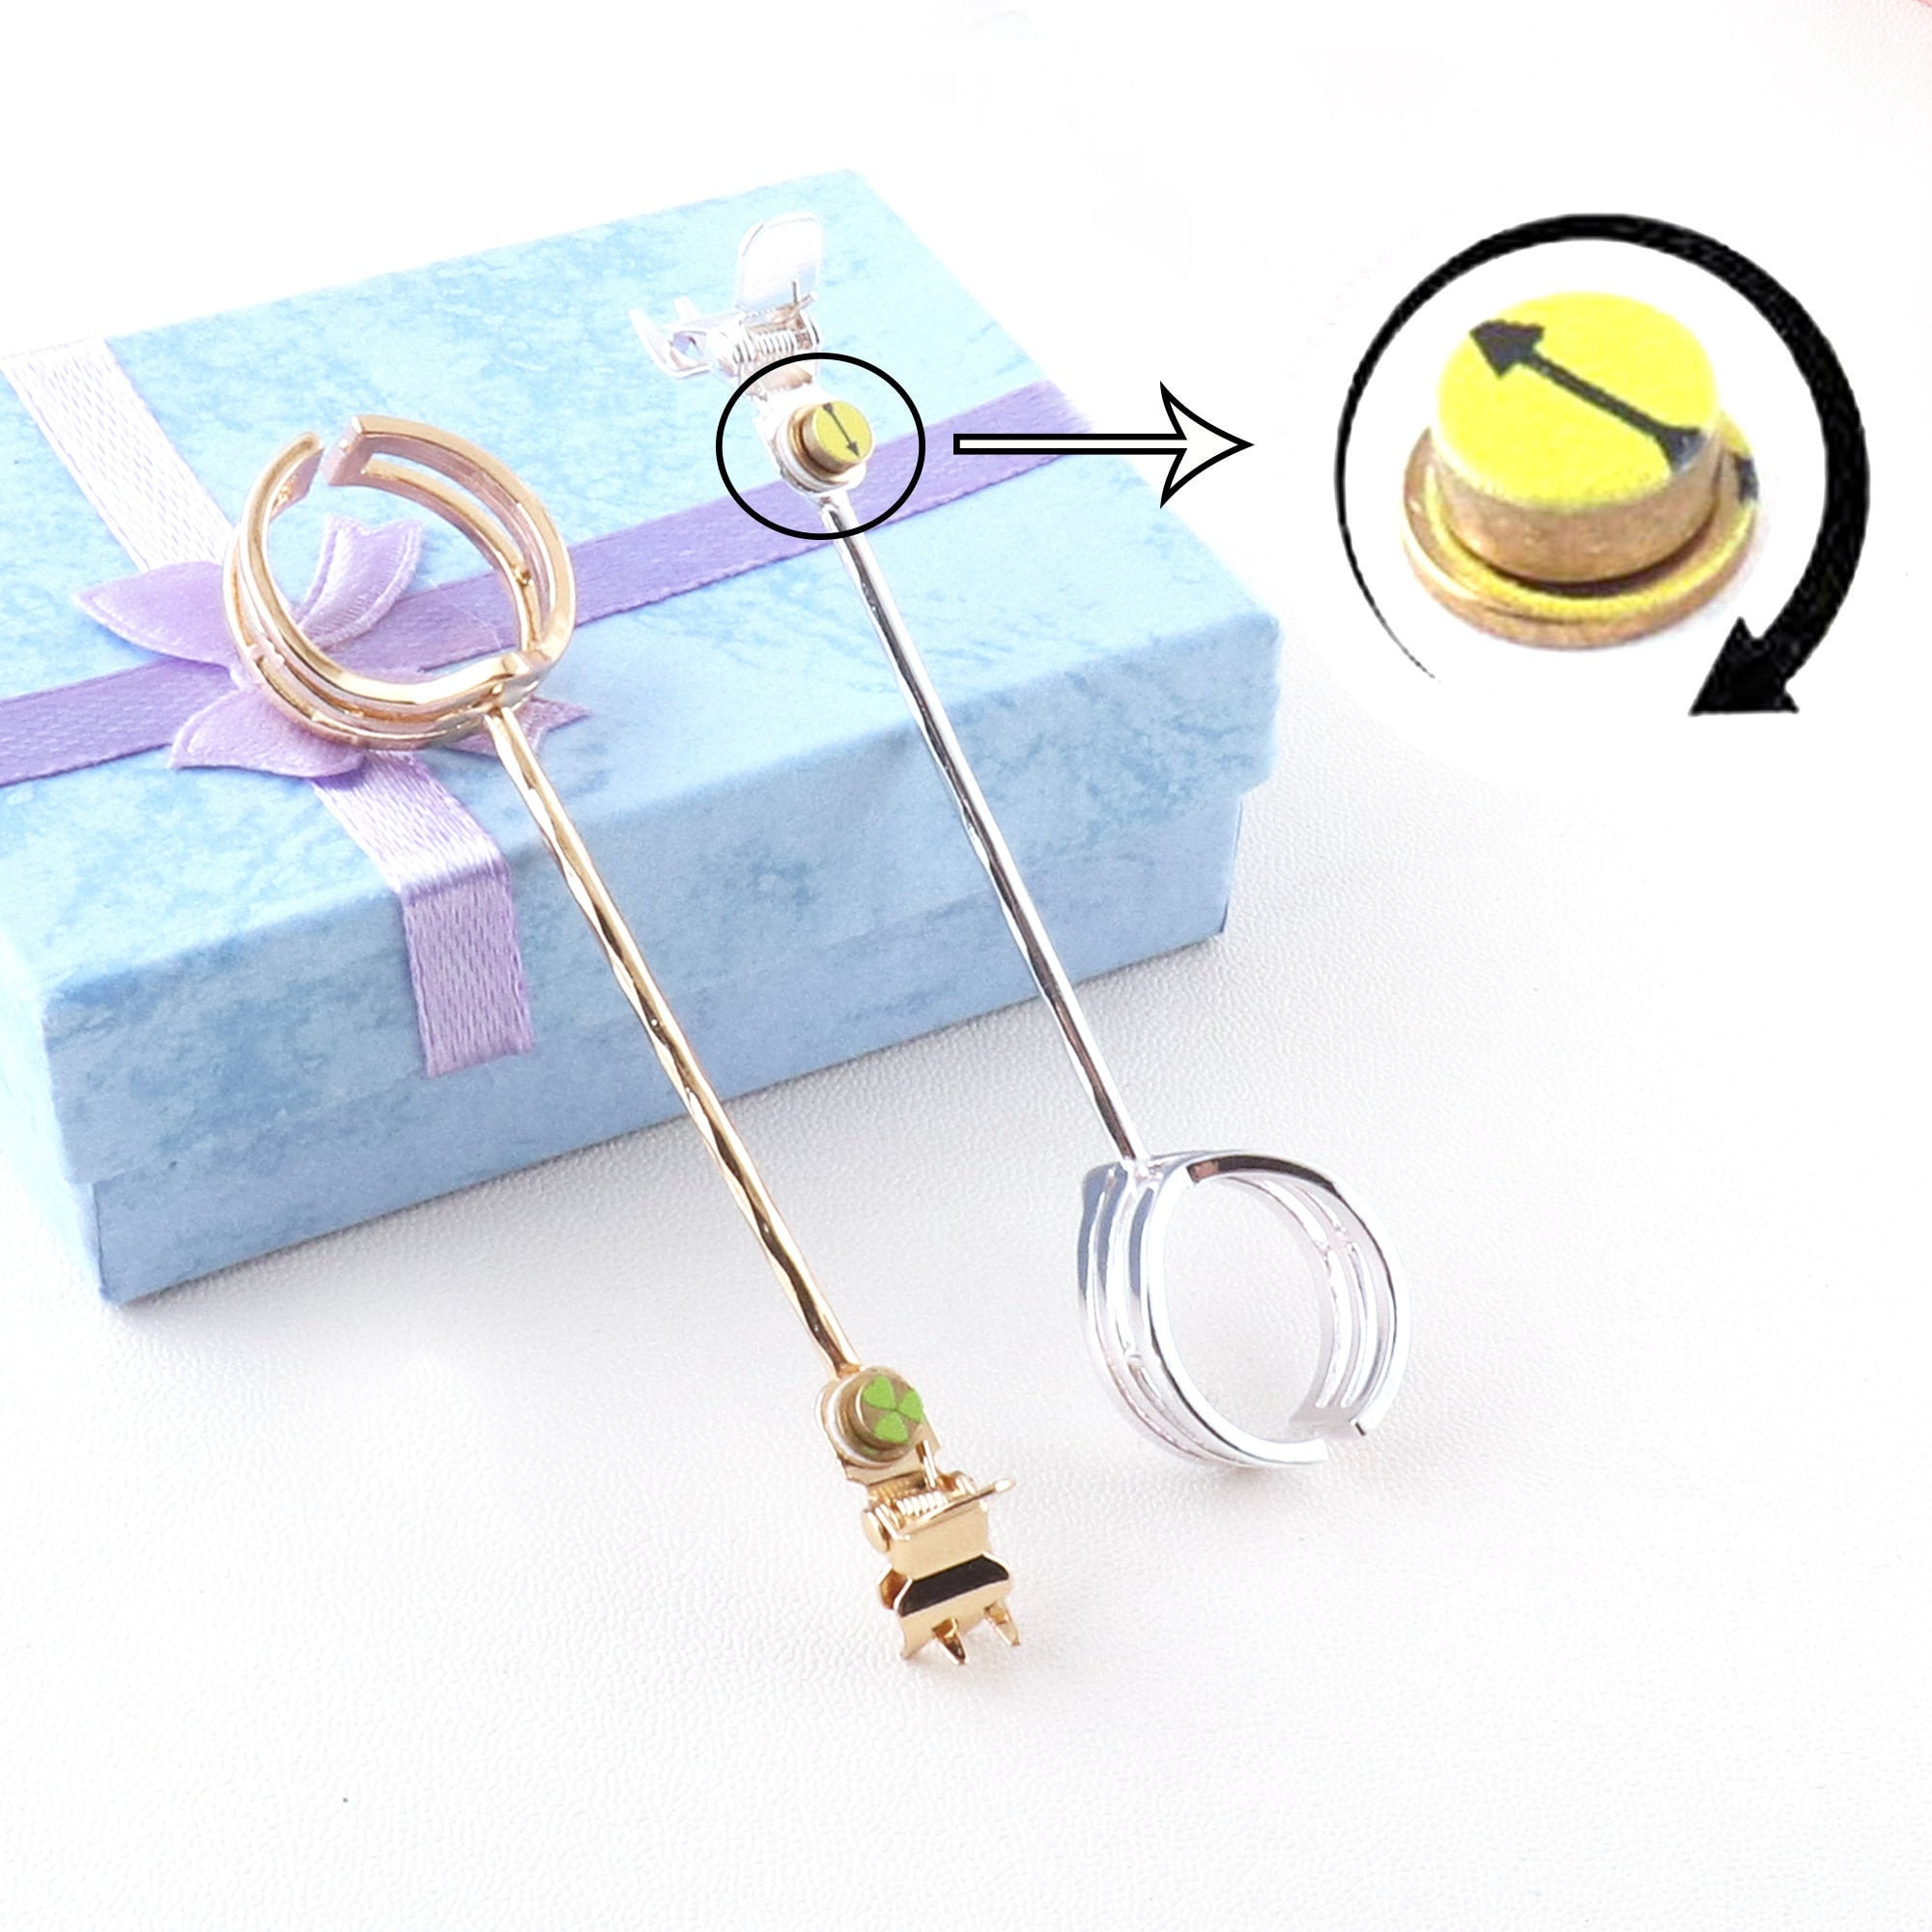 Cigarette Ring Holder Ring With Jewelry Bearings Rotating Elegant Smoke  Ring Smoke Prevention Ring Valentine's Day Gift Creative Jewelry 